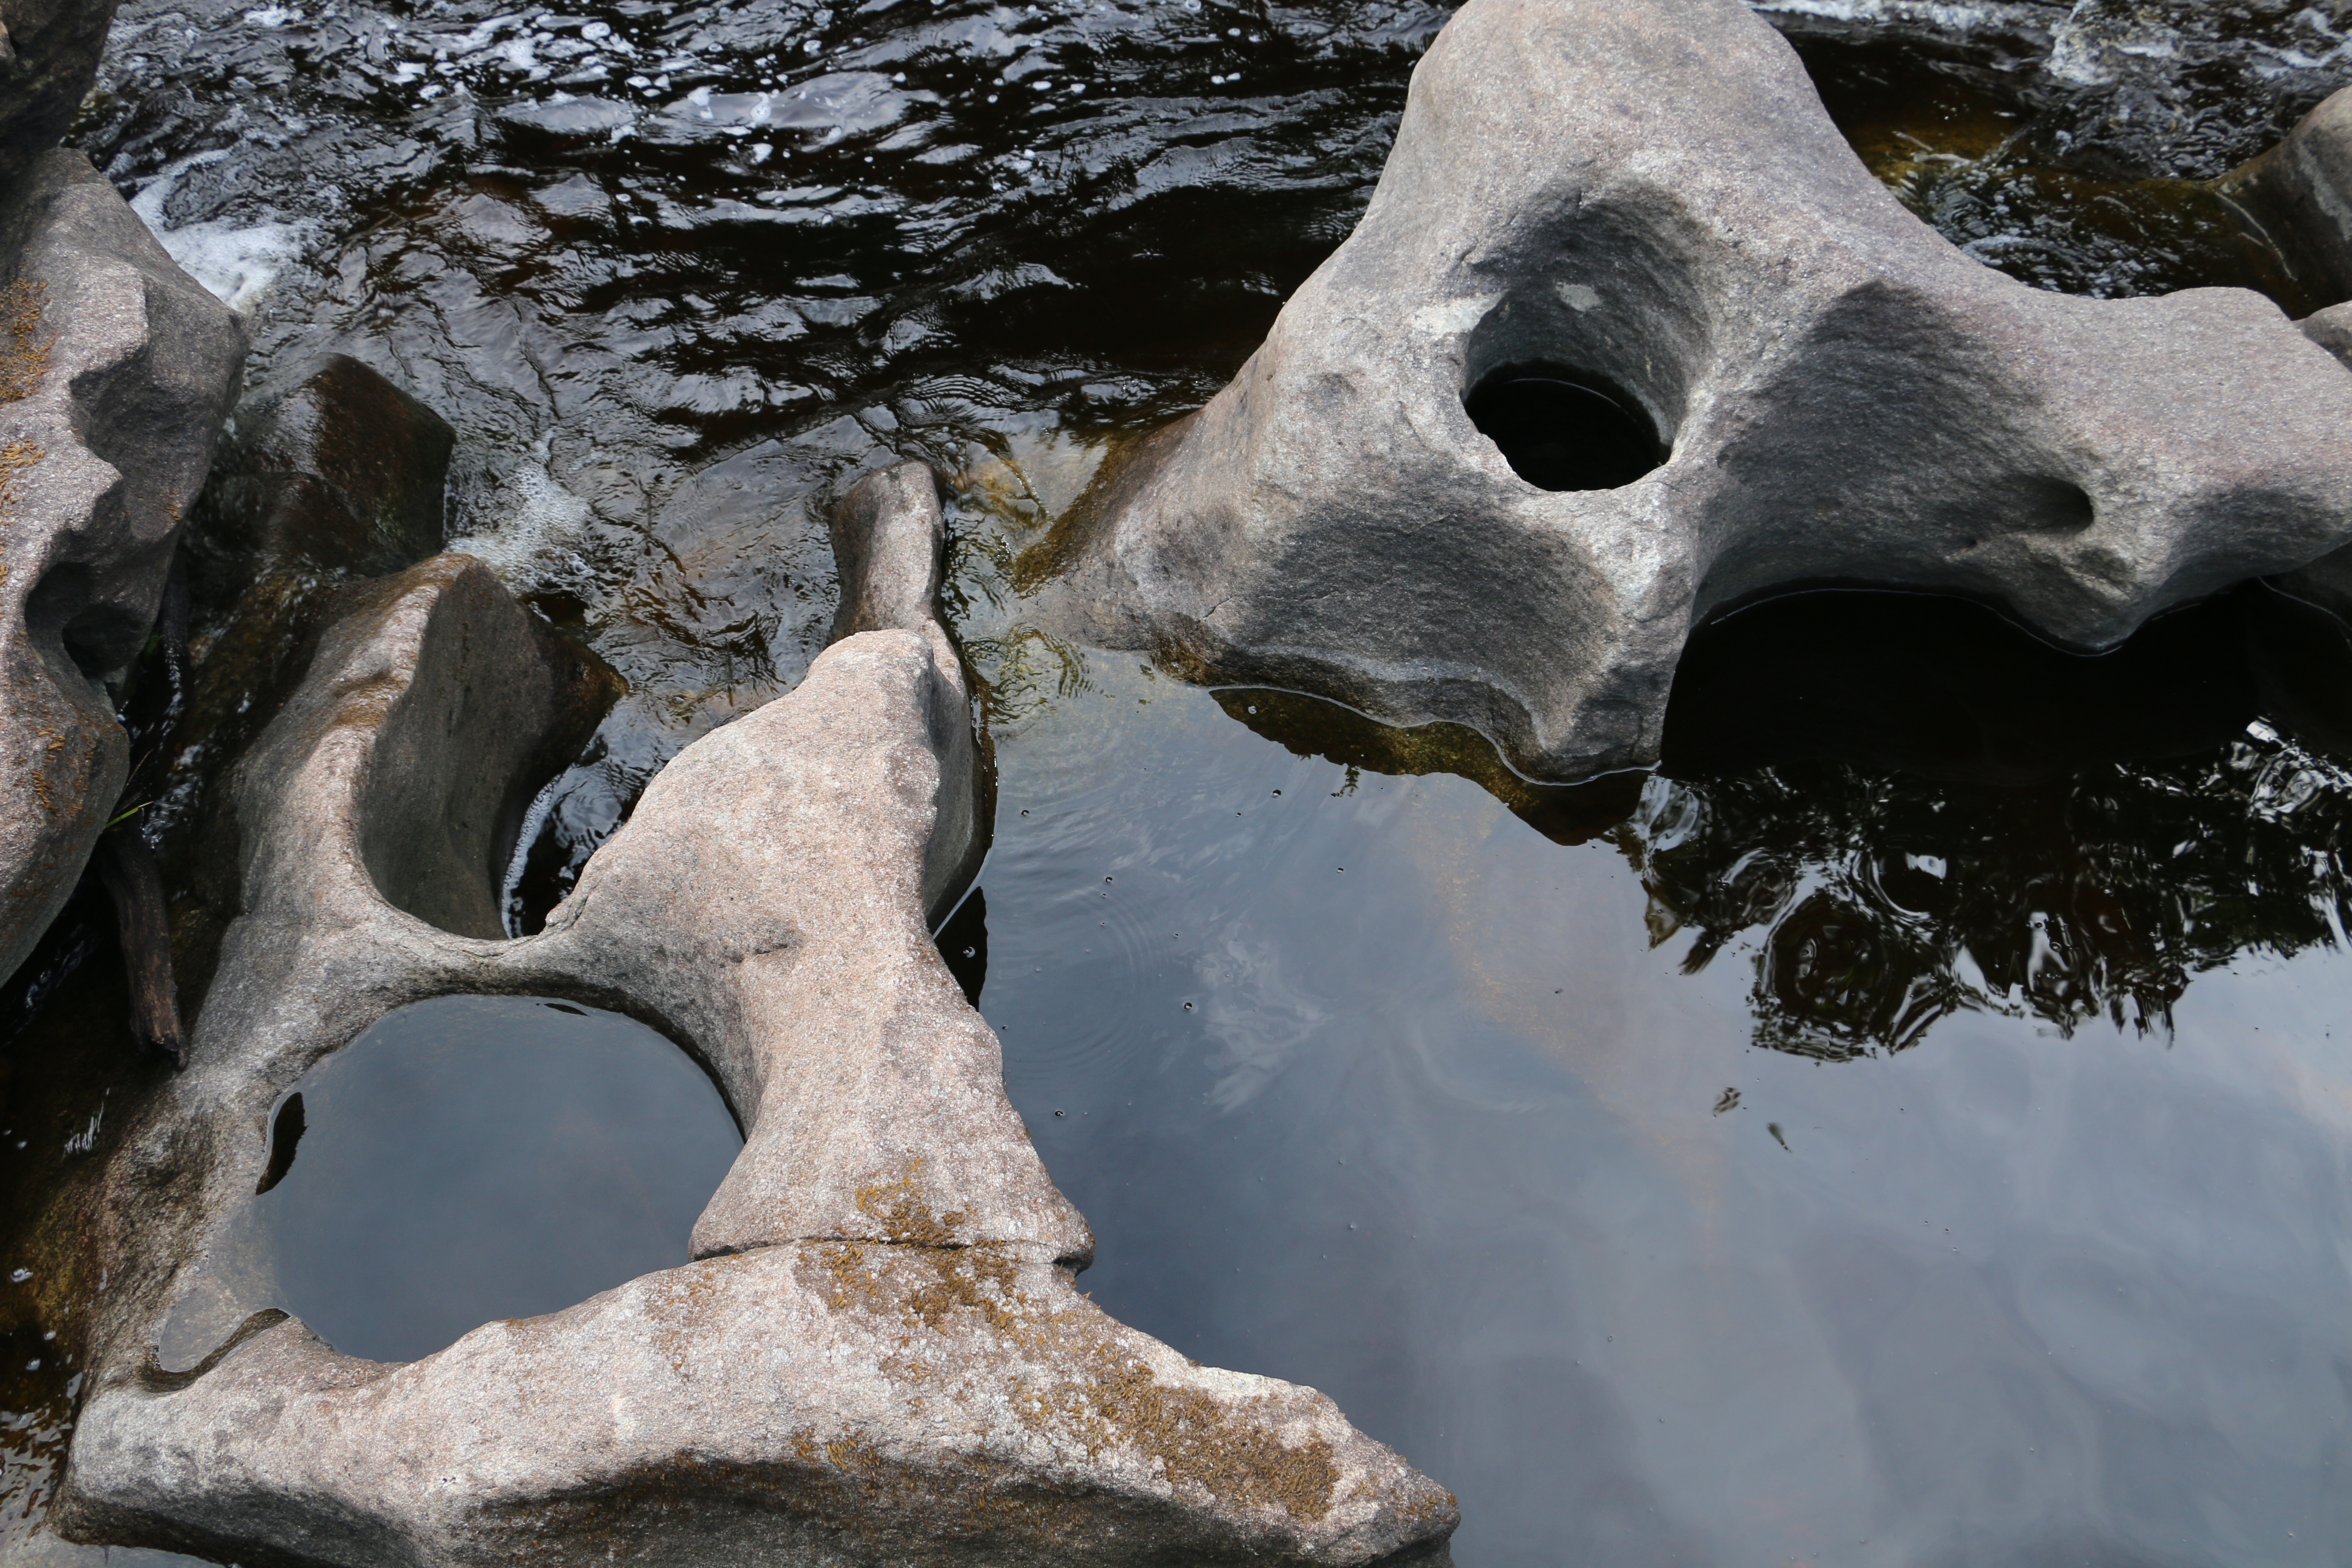 A formation of rocks with natural holes carved in from water erosion